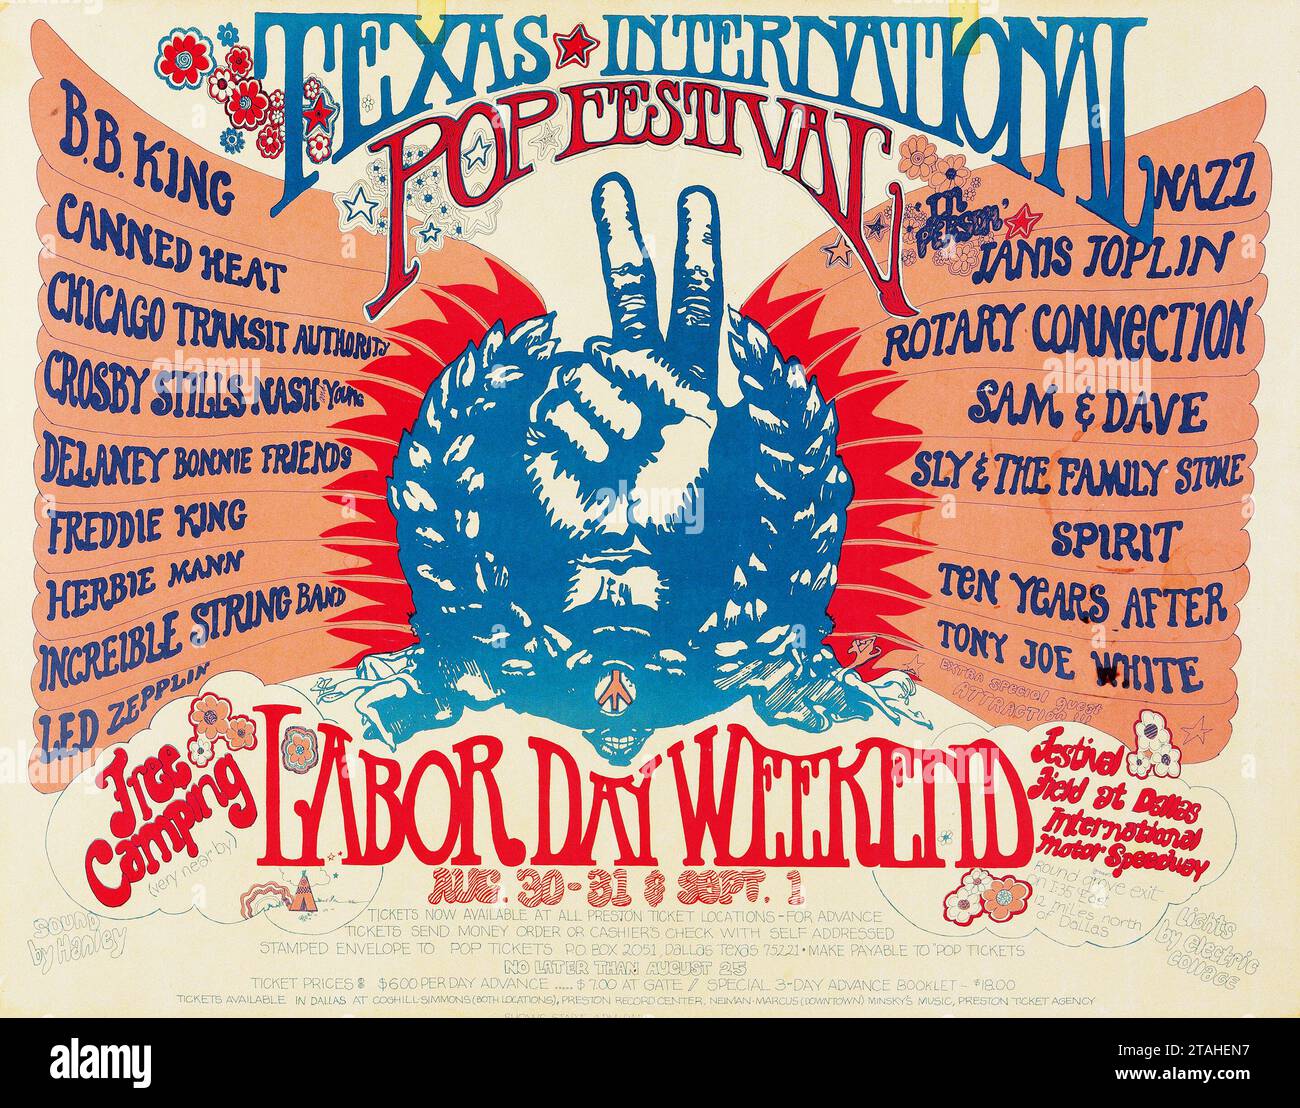 Texas International Pop Festival Concert Poster (1969) BB King, Canned Heat, Led Zeppelin, Janis Joplin, Ten Years After, Crosby Stills Nash - color corrected Stock Photo